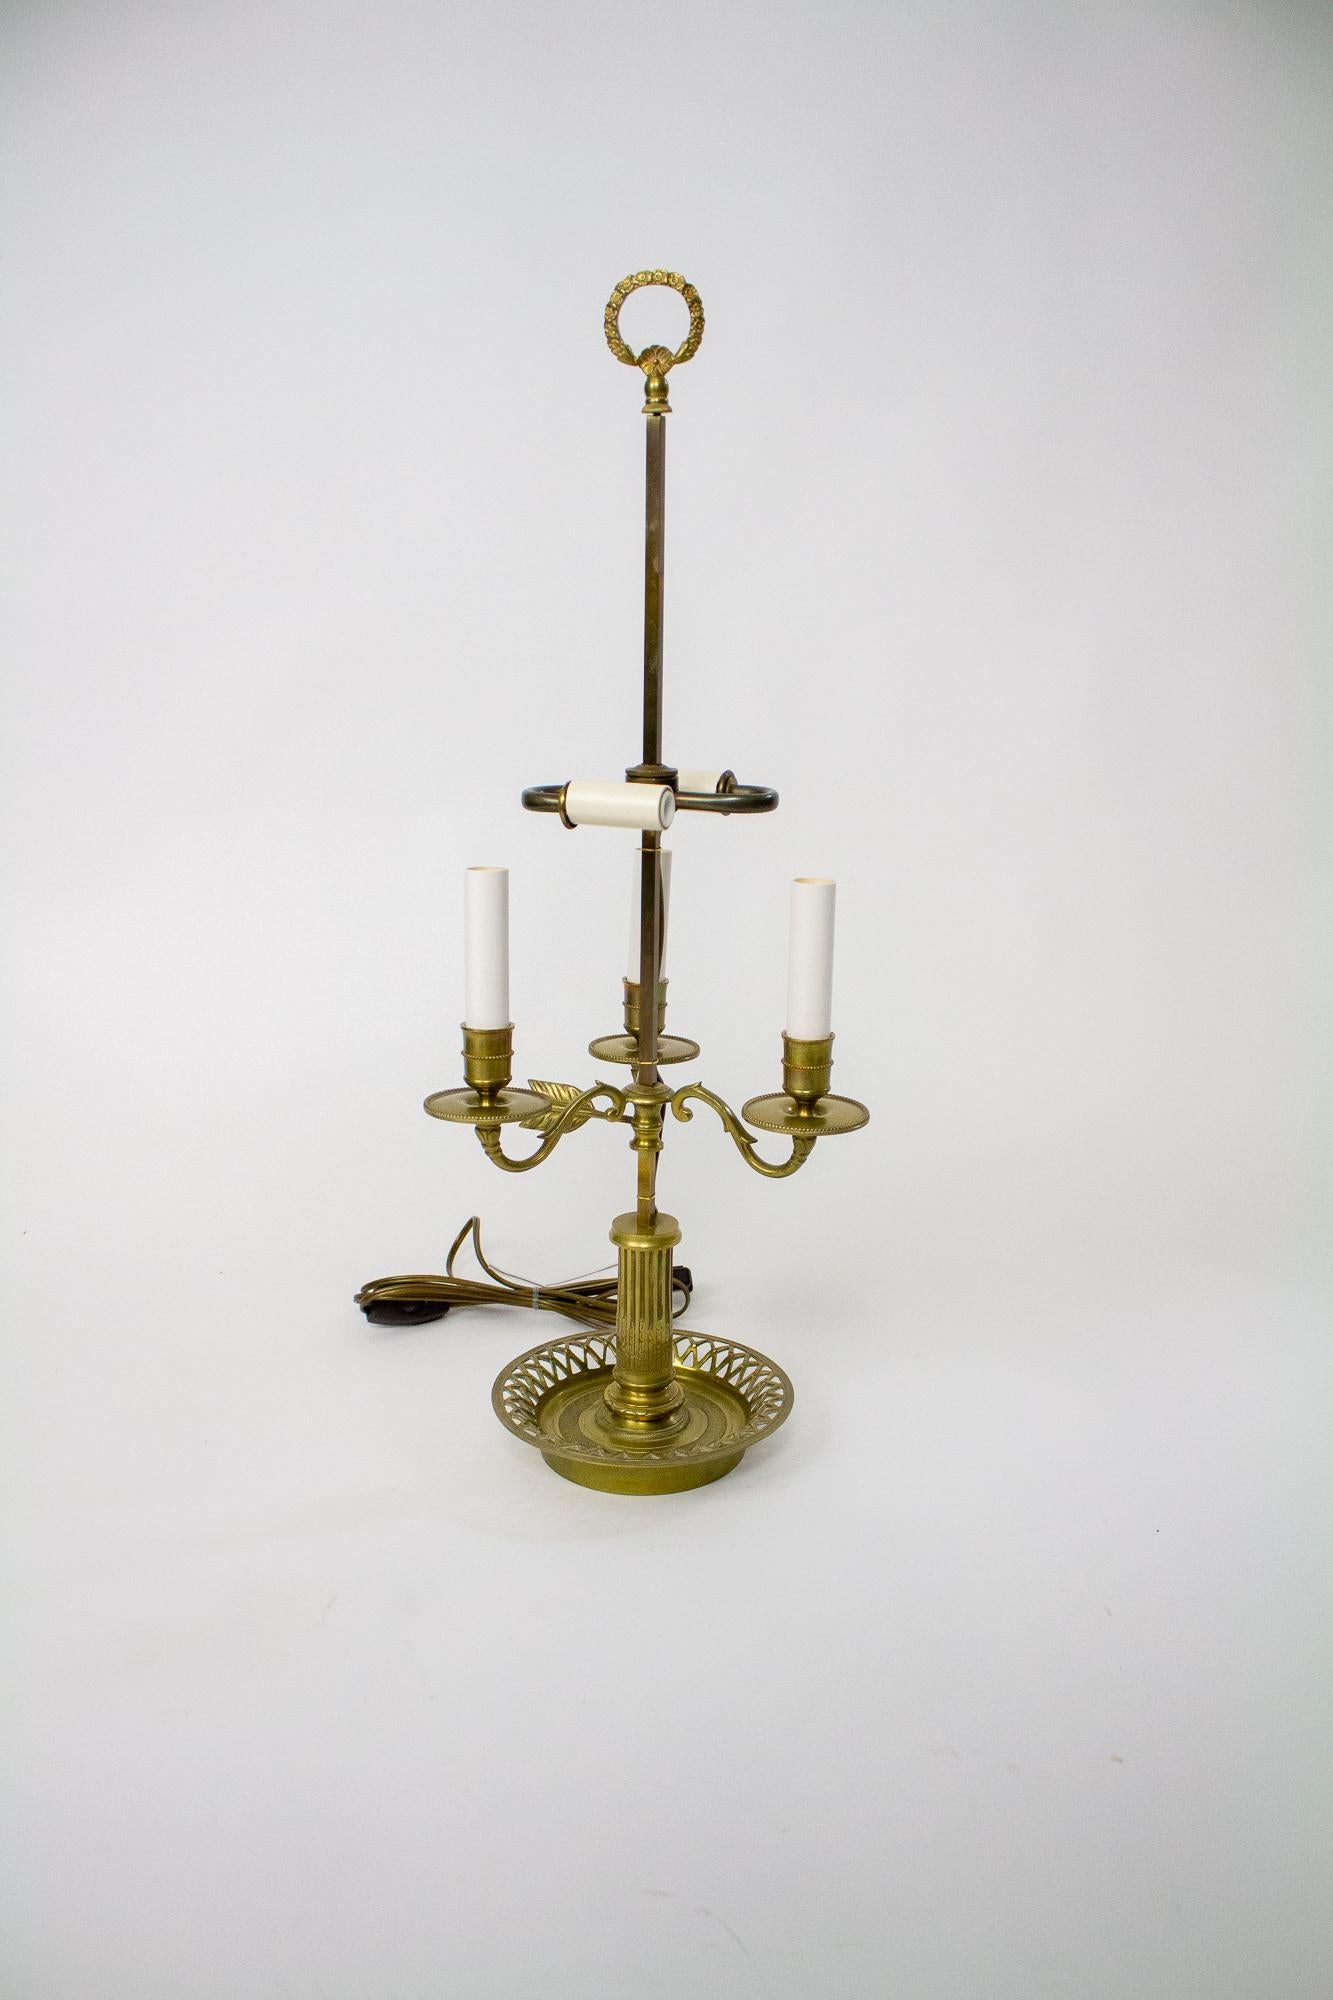 Bouillotte lamp in cast brass. The three arms That extend from the stem are for candle. There is a hidden two light cluster that takes candelabra bulbs. 60 Watt max per socket. Bottom tray is round with a decorative edging. The shade is a forest